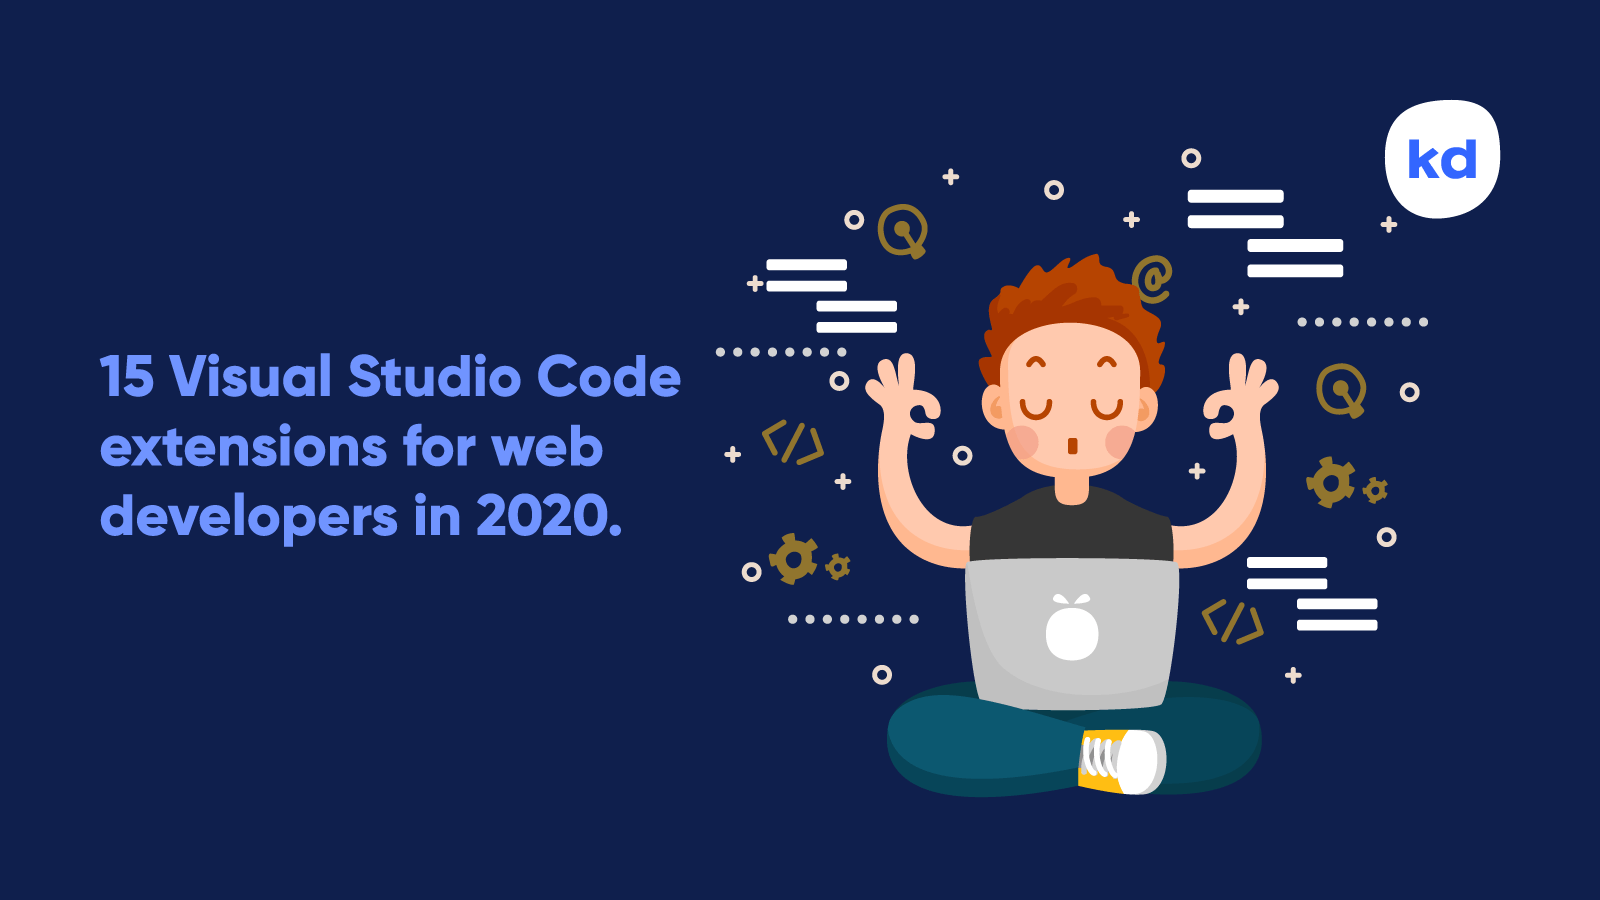 15 Visual Studio Code extensions for web developers in 2020.